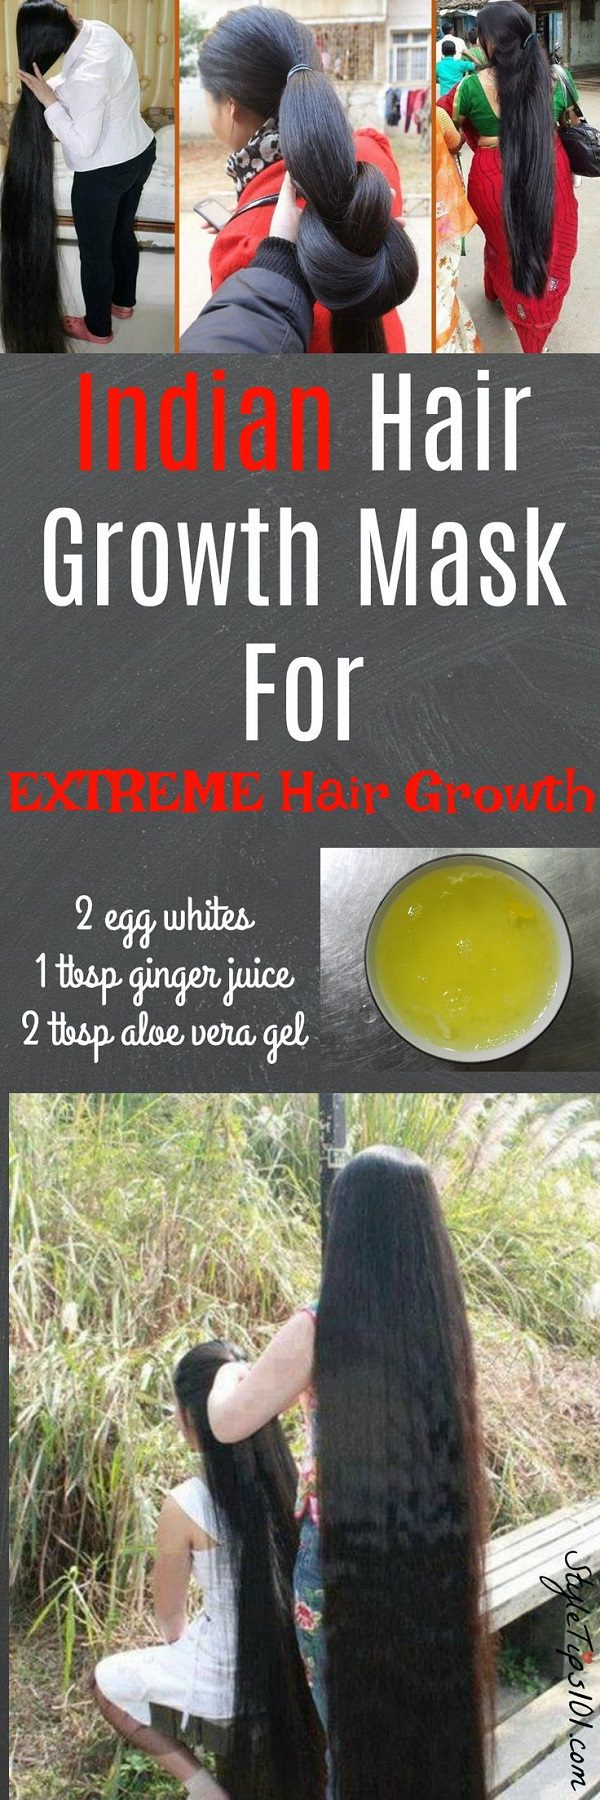 Indian Hair Growth Mask For Extreme Hair Growth Fashion Daily